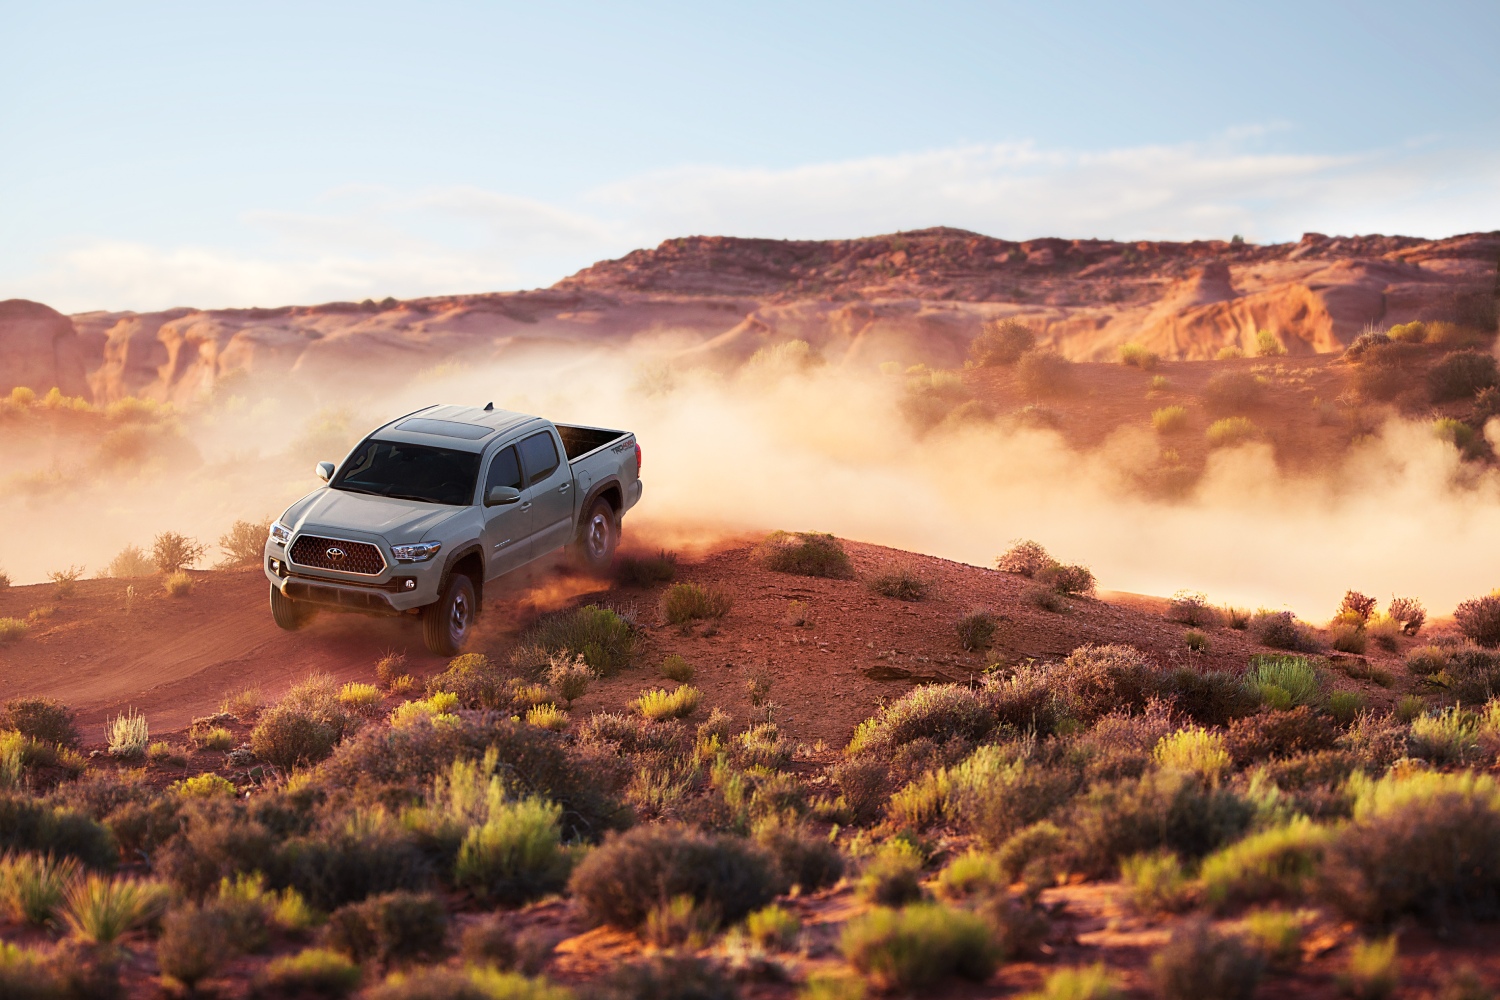 The best midsize trucks from 2018 like the Toyota Tacoma